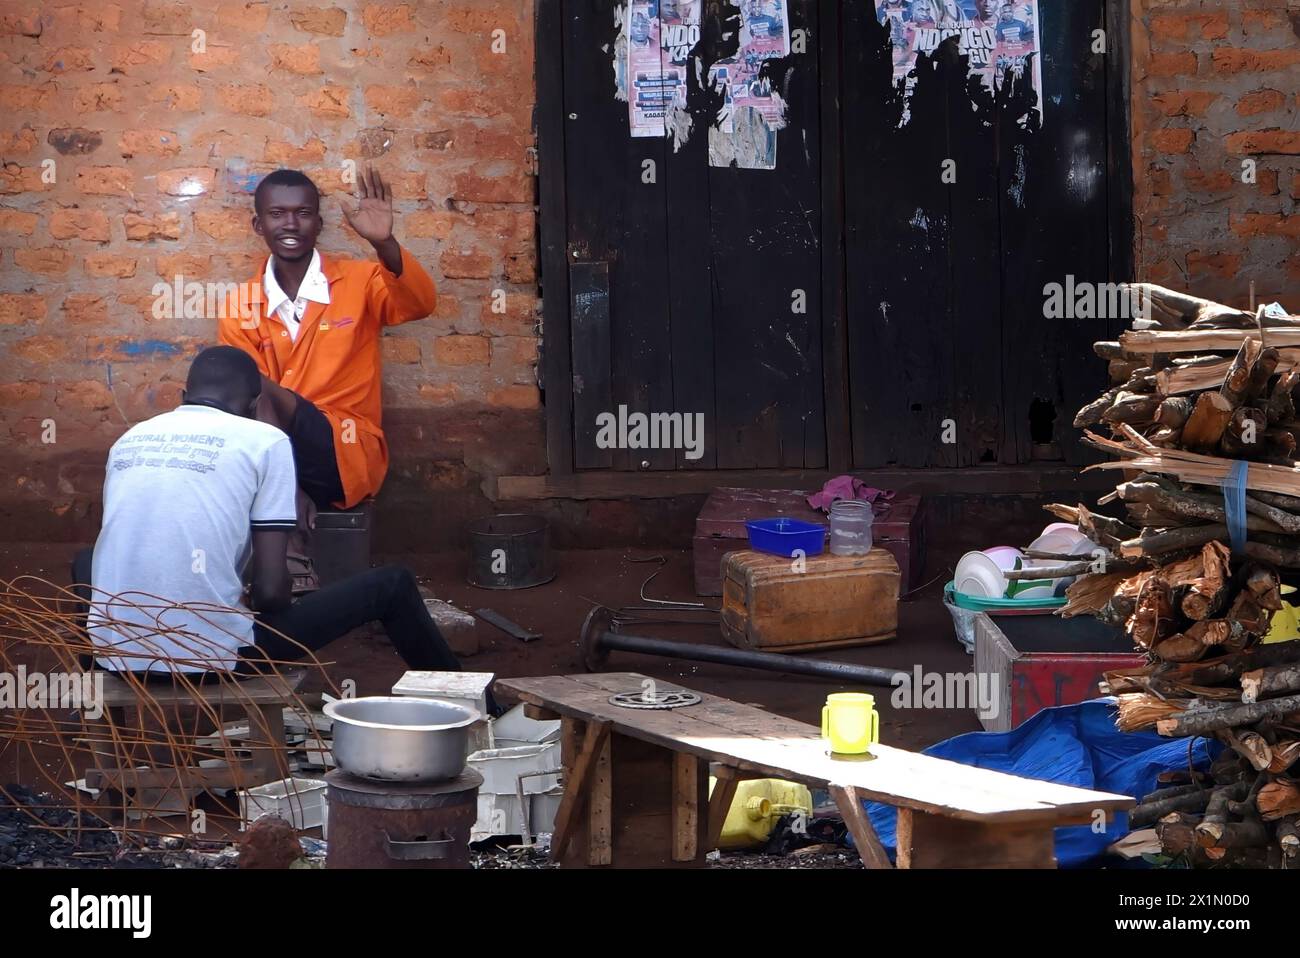 A warm greeting from Uganda's Masindi road: Amid scrap, a person smiles as another receives a pedicure, showcasing roadside hospitality and friendly c Stock Photo